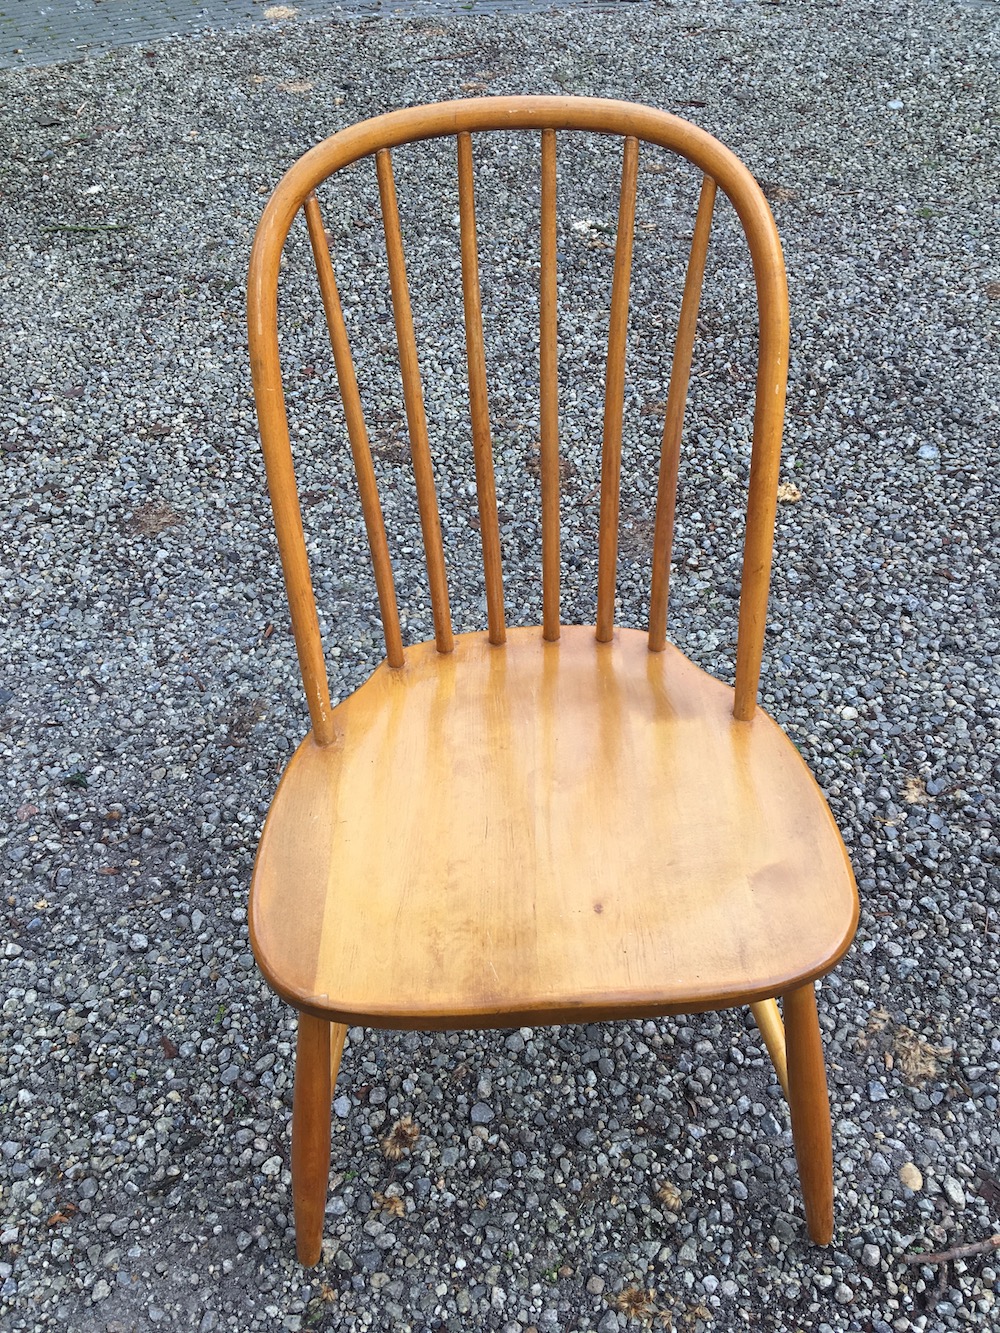 Belgian dining chairs, vintage chairs, Imexcotra, wooden chairs